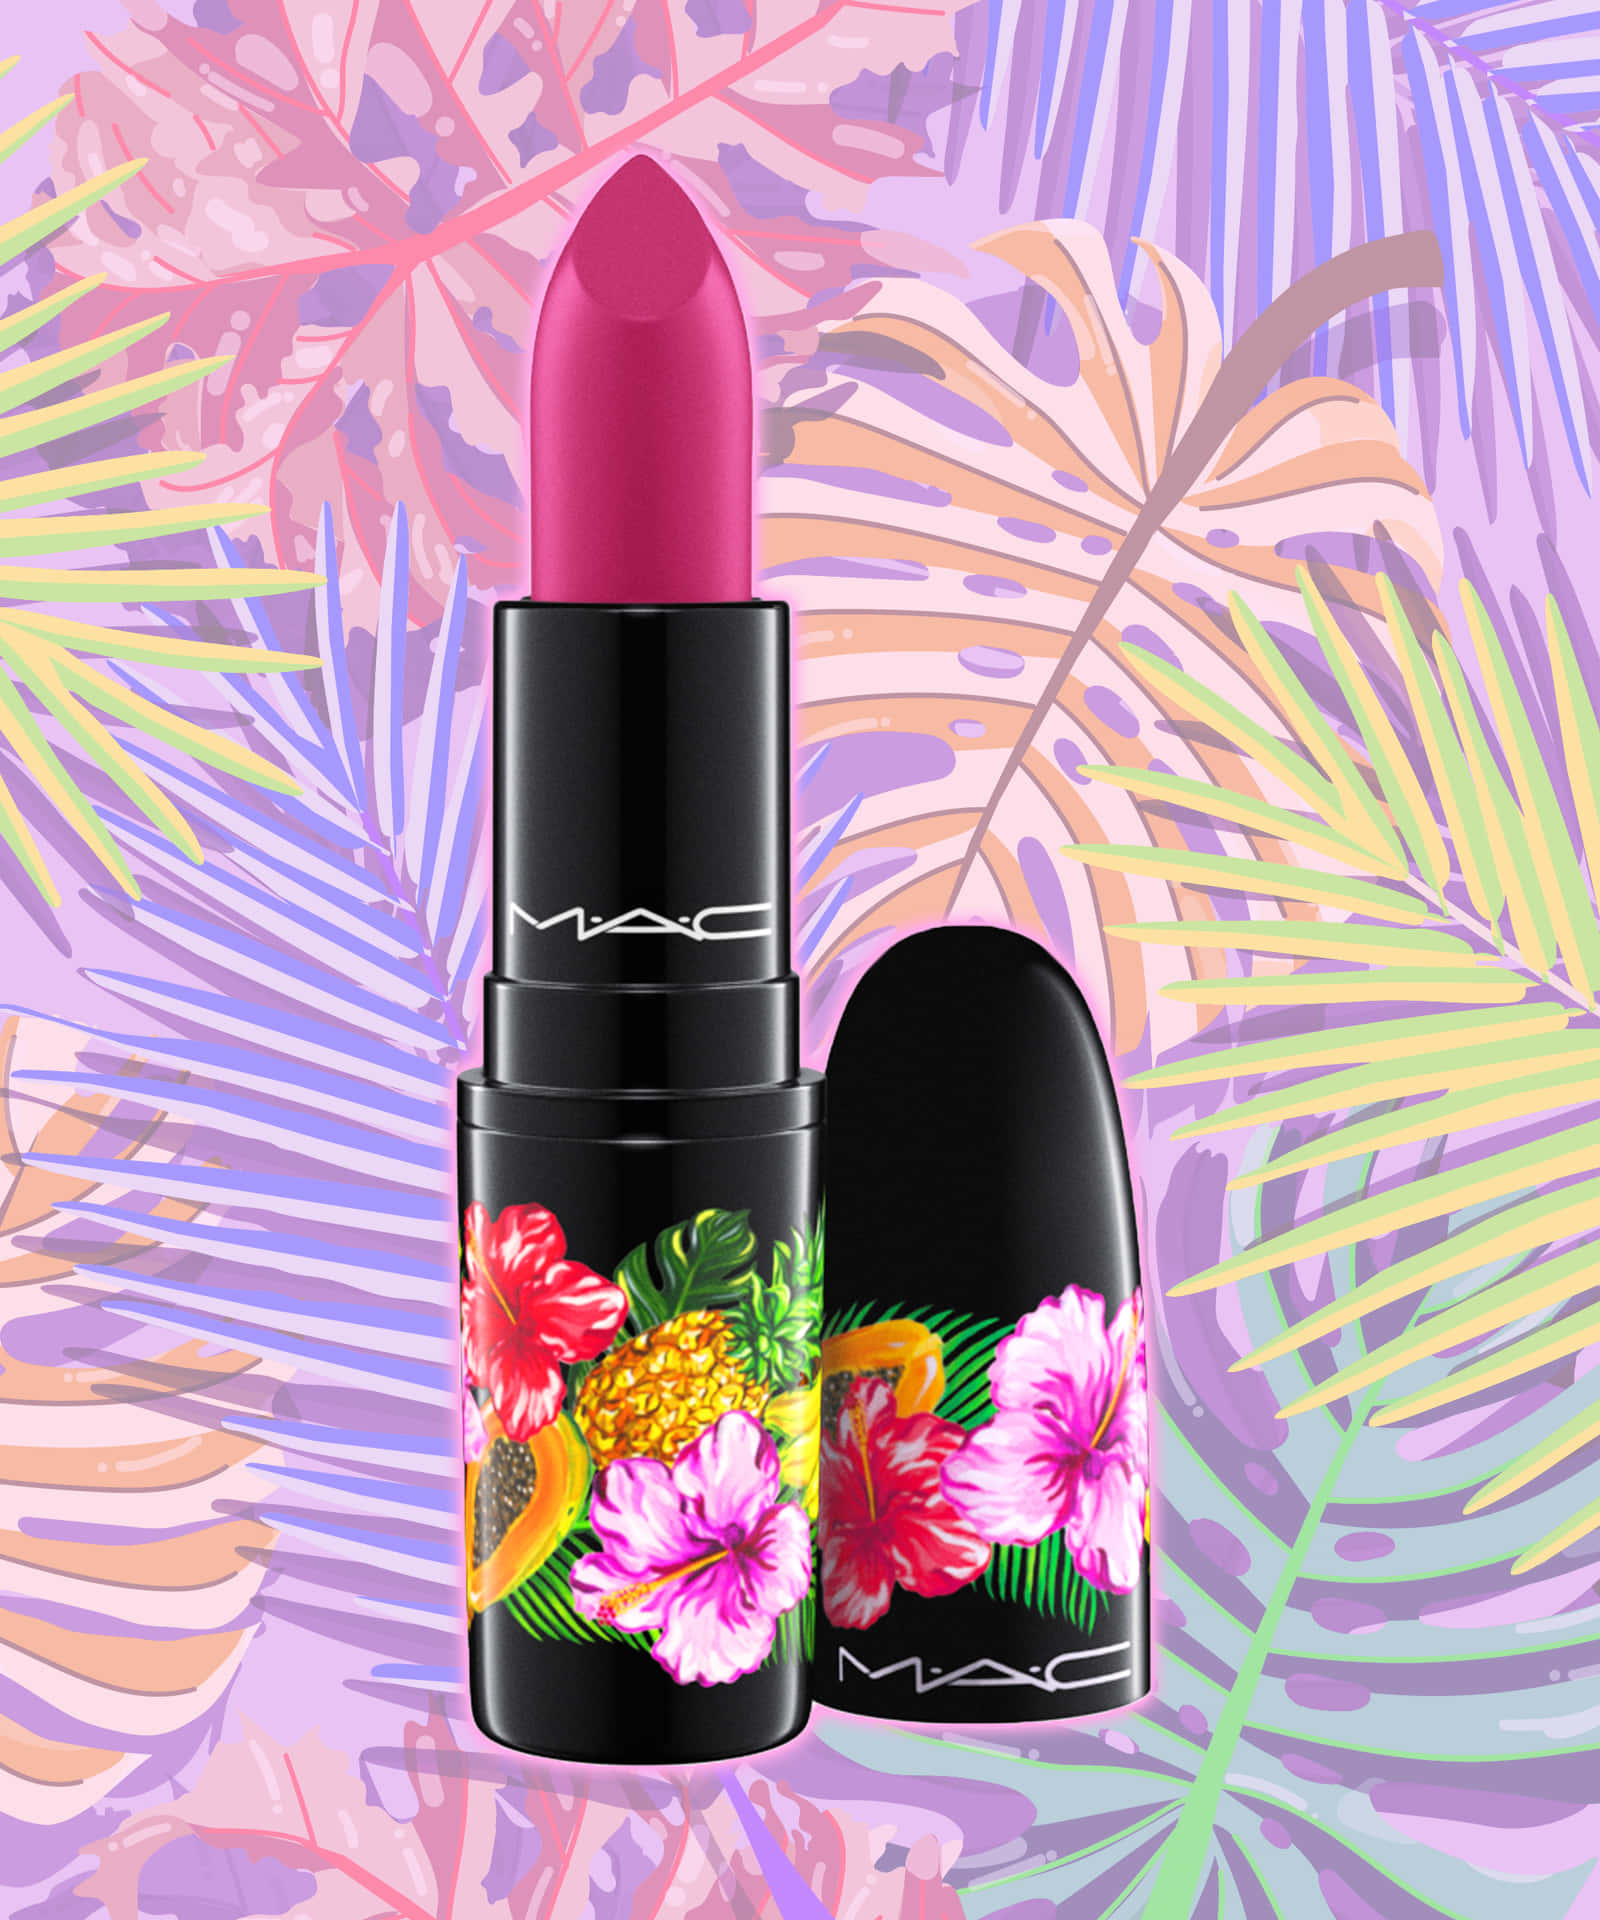 Find your perfect look with MAC Cosmetics